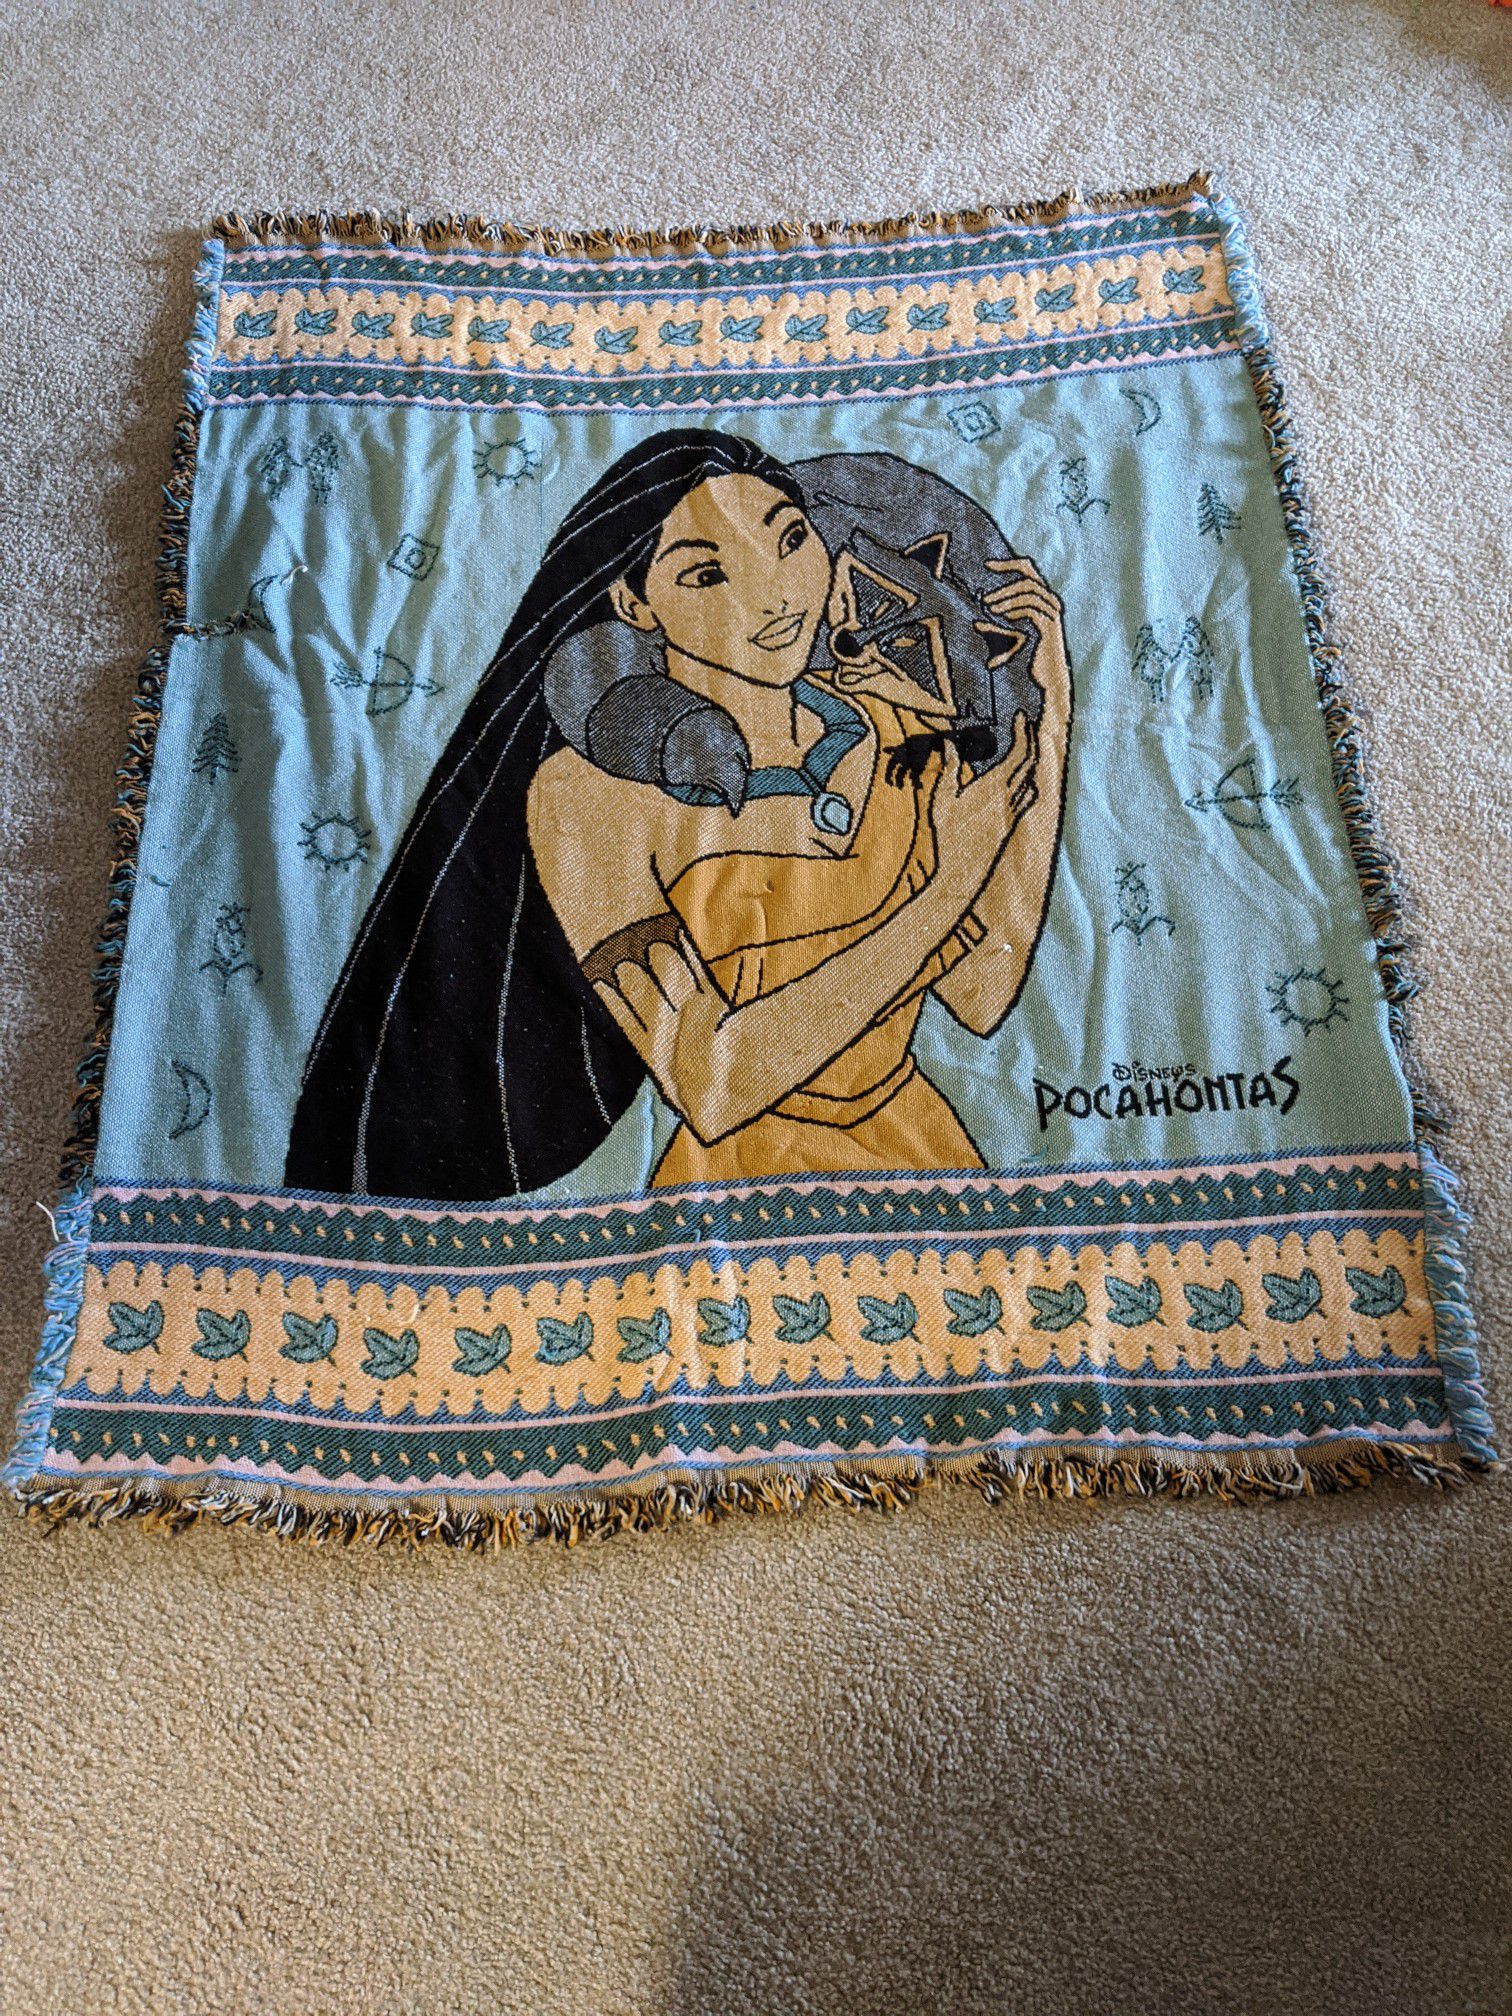 Pocahontas Knitted Throw Blanket